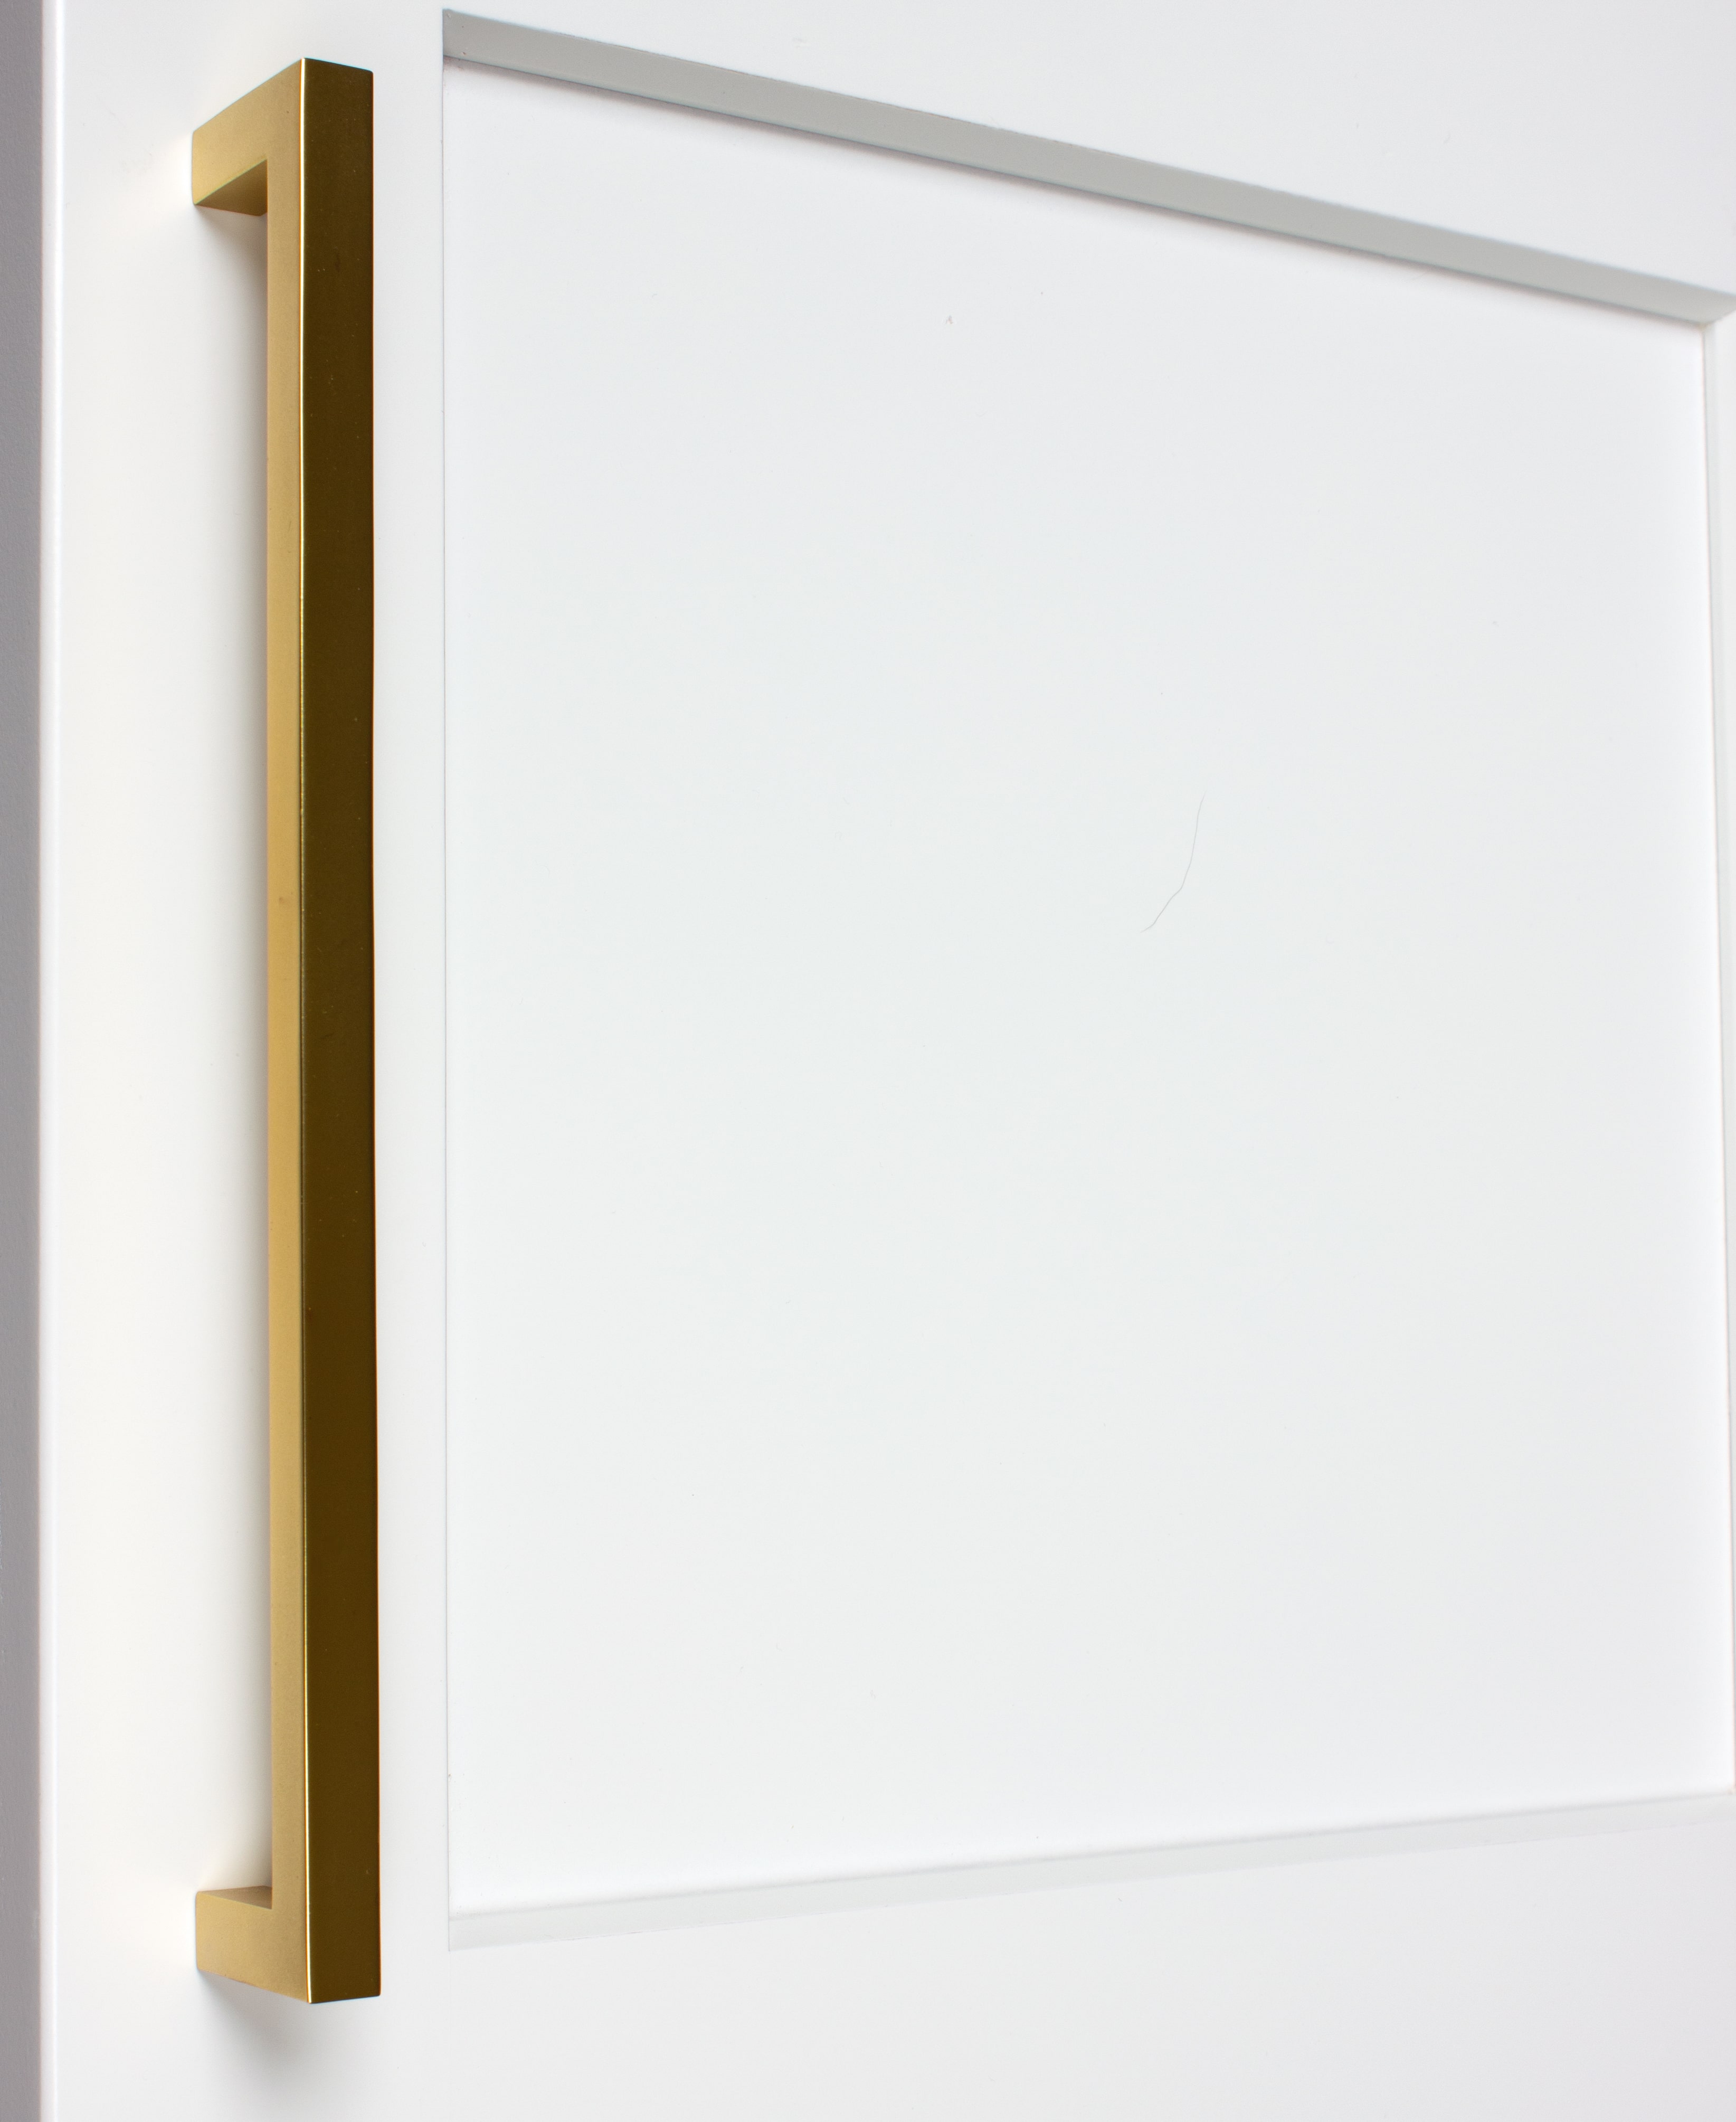 GlideRite 8-3/4 in. Center Solid Square Bar Cabinet Pulls, Brass Gold, Pack of 25 - image 2 of 3